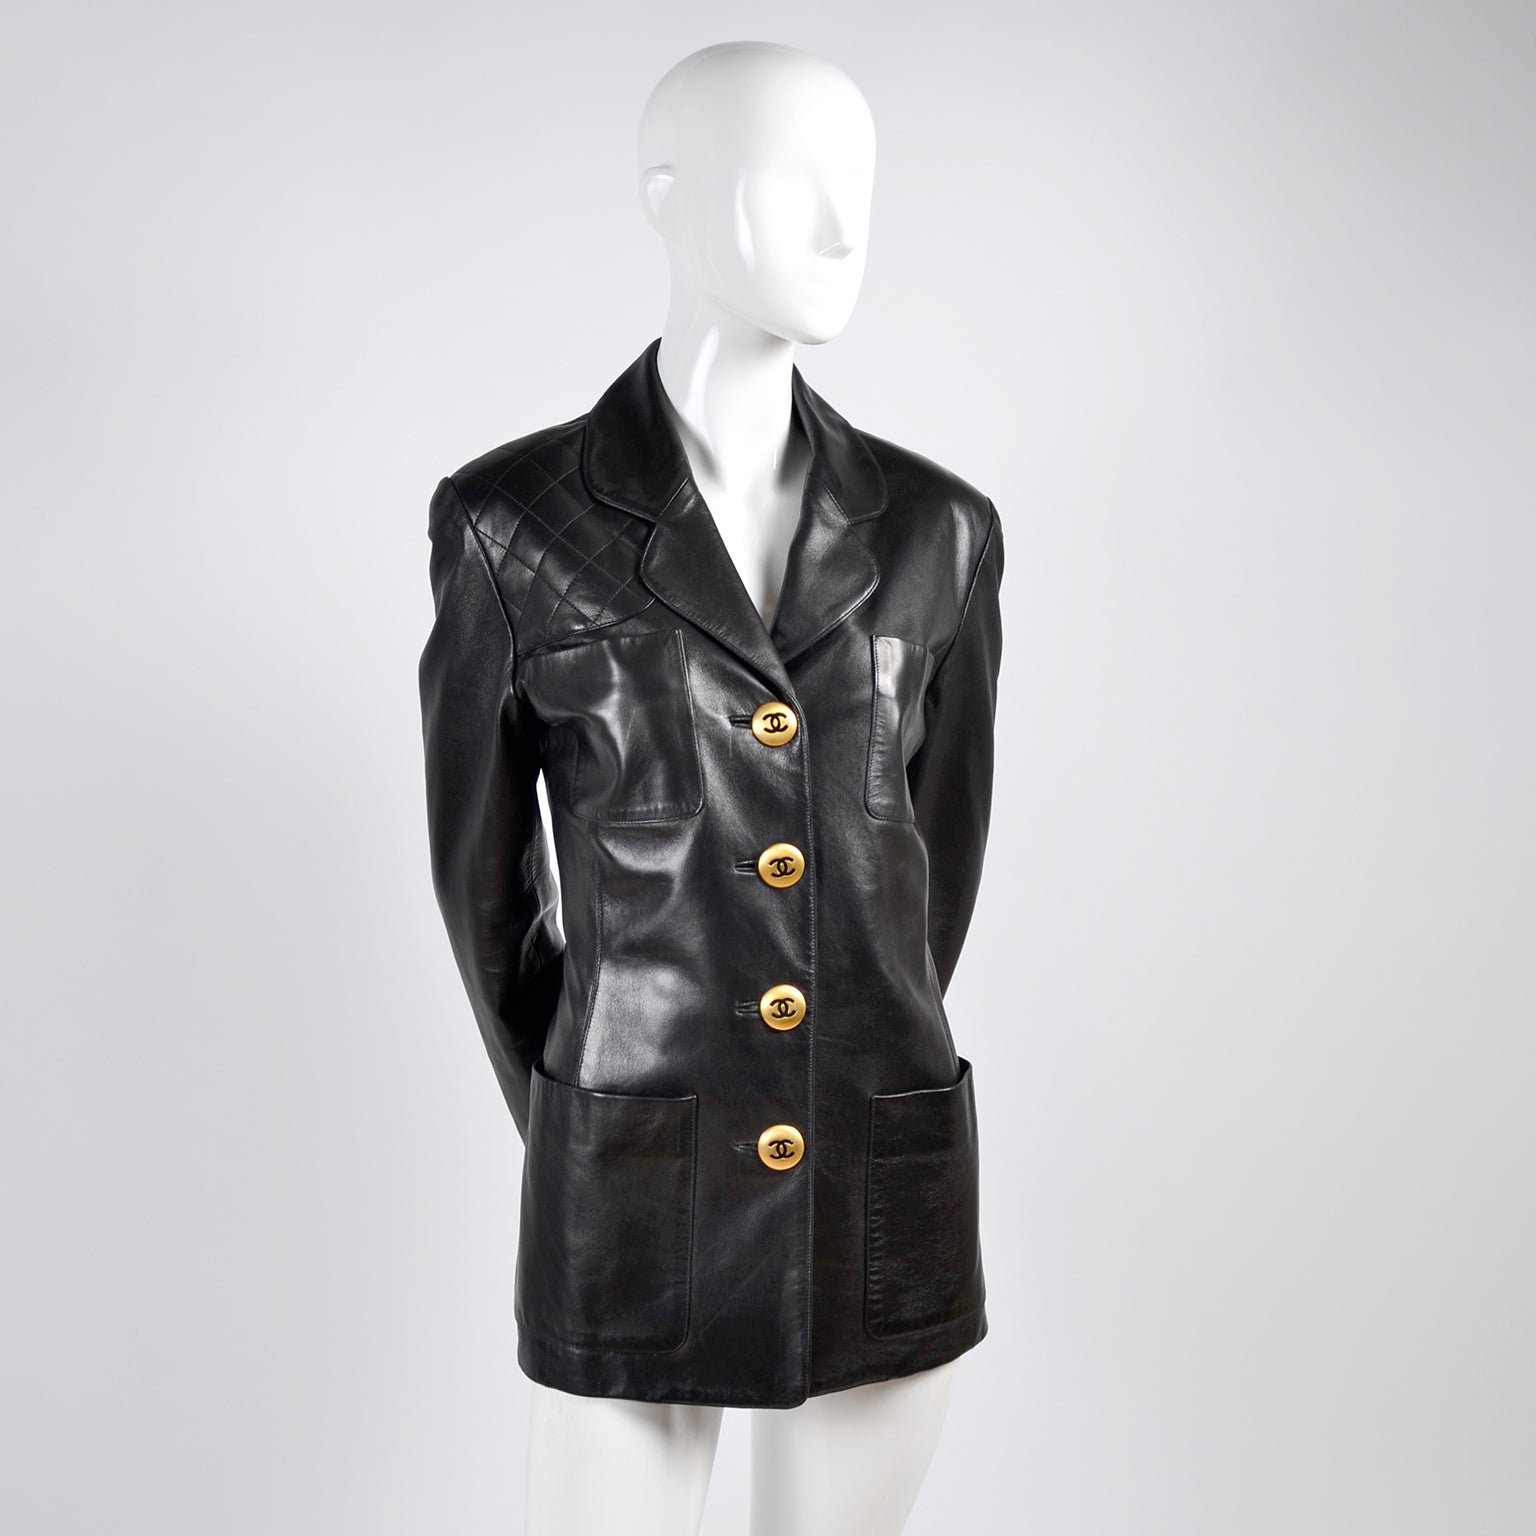 F/W 1992 Chanel Leather Jacket Black w/ Quilting & CC Logo Brass Buttons 6/8